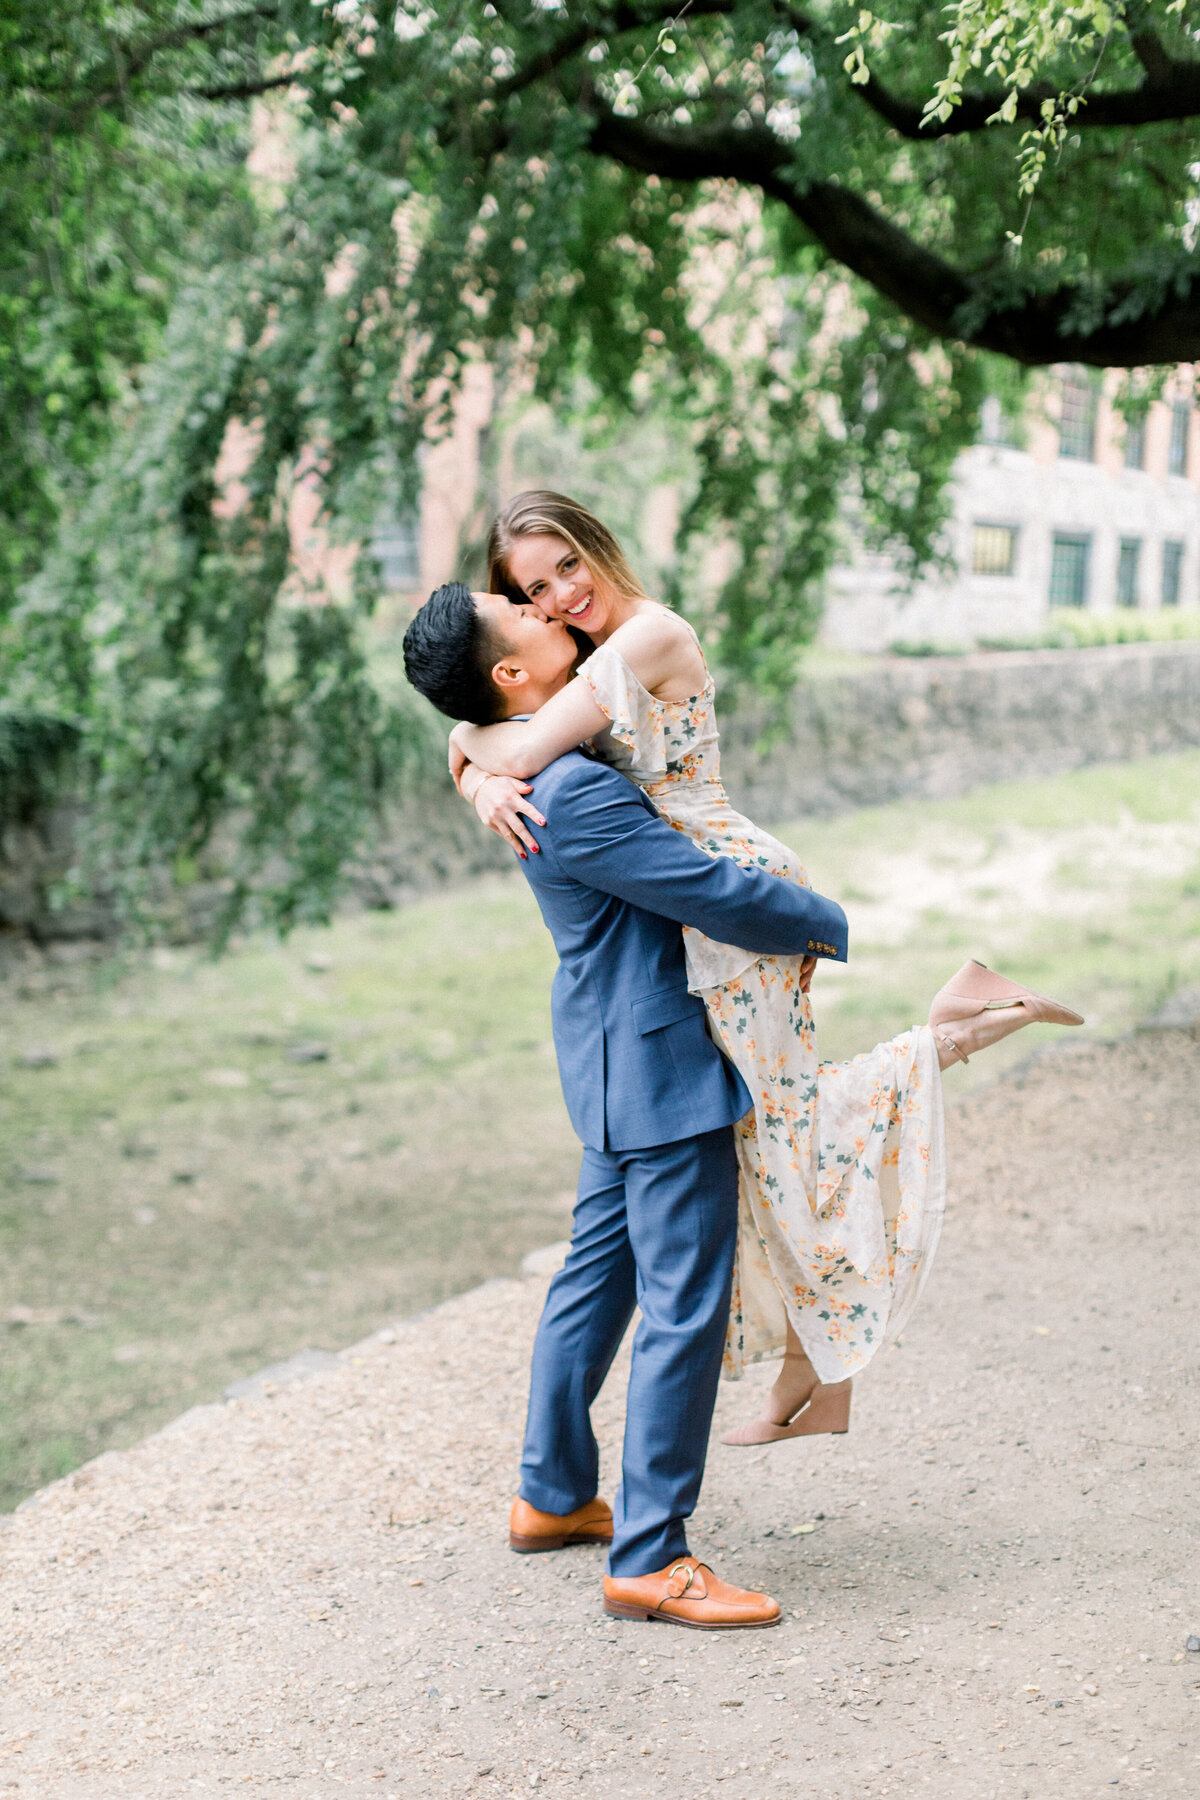 Candice Adelle Photography Charleston DC Wedding Photographer Marissa and Mike (3 of 9)